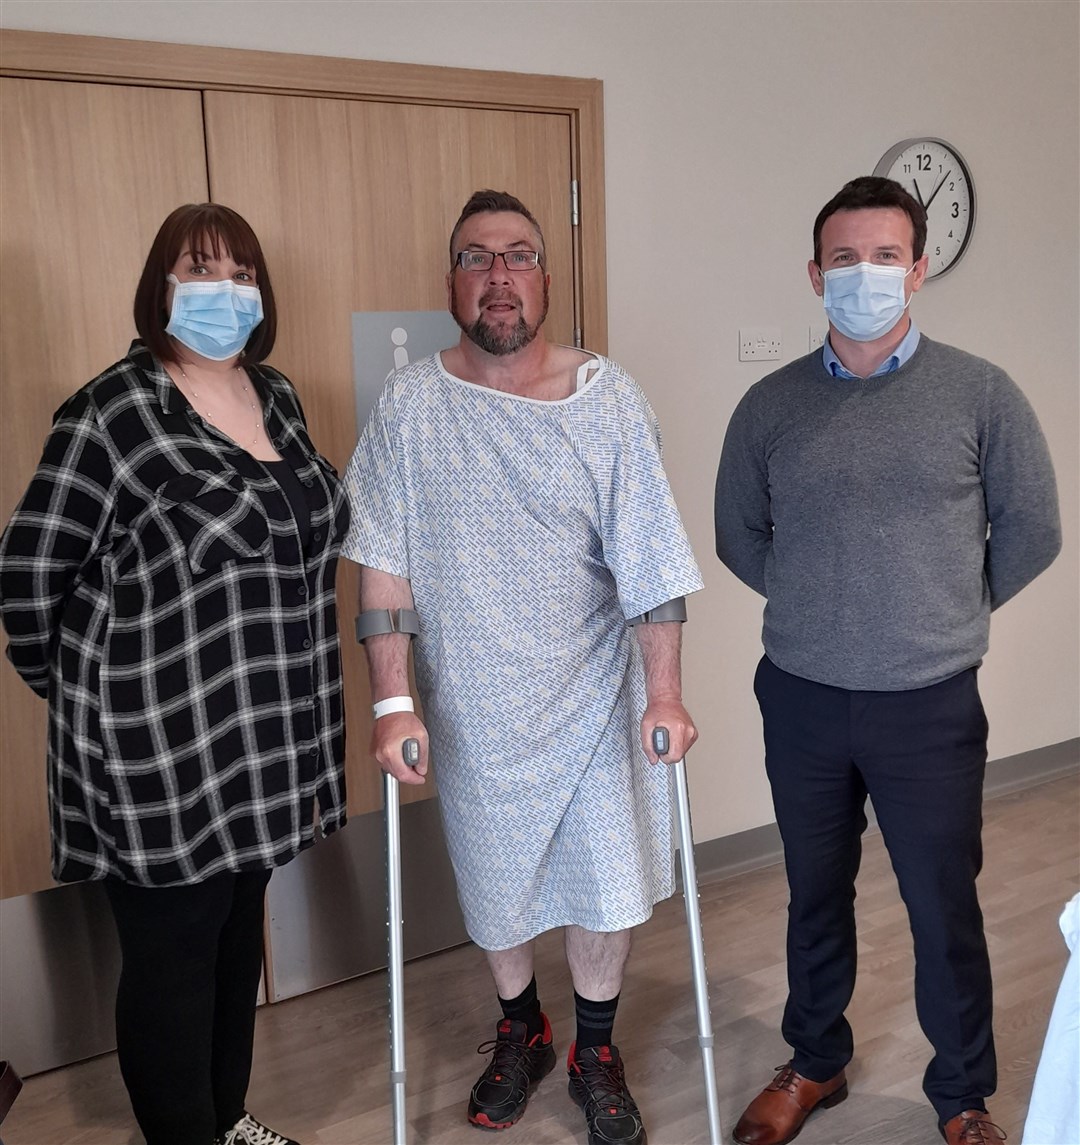 David Smith, the first orthopaedic patient in NHS Grampian to be approved at Dr Gray’s Hospital and operated on at the national treatment centre – Highland,pictured with Colin McNair, Clinical Director NTC Highland and Gail Little, staff nurse at Dr Gray's Hospital.